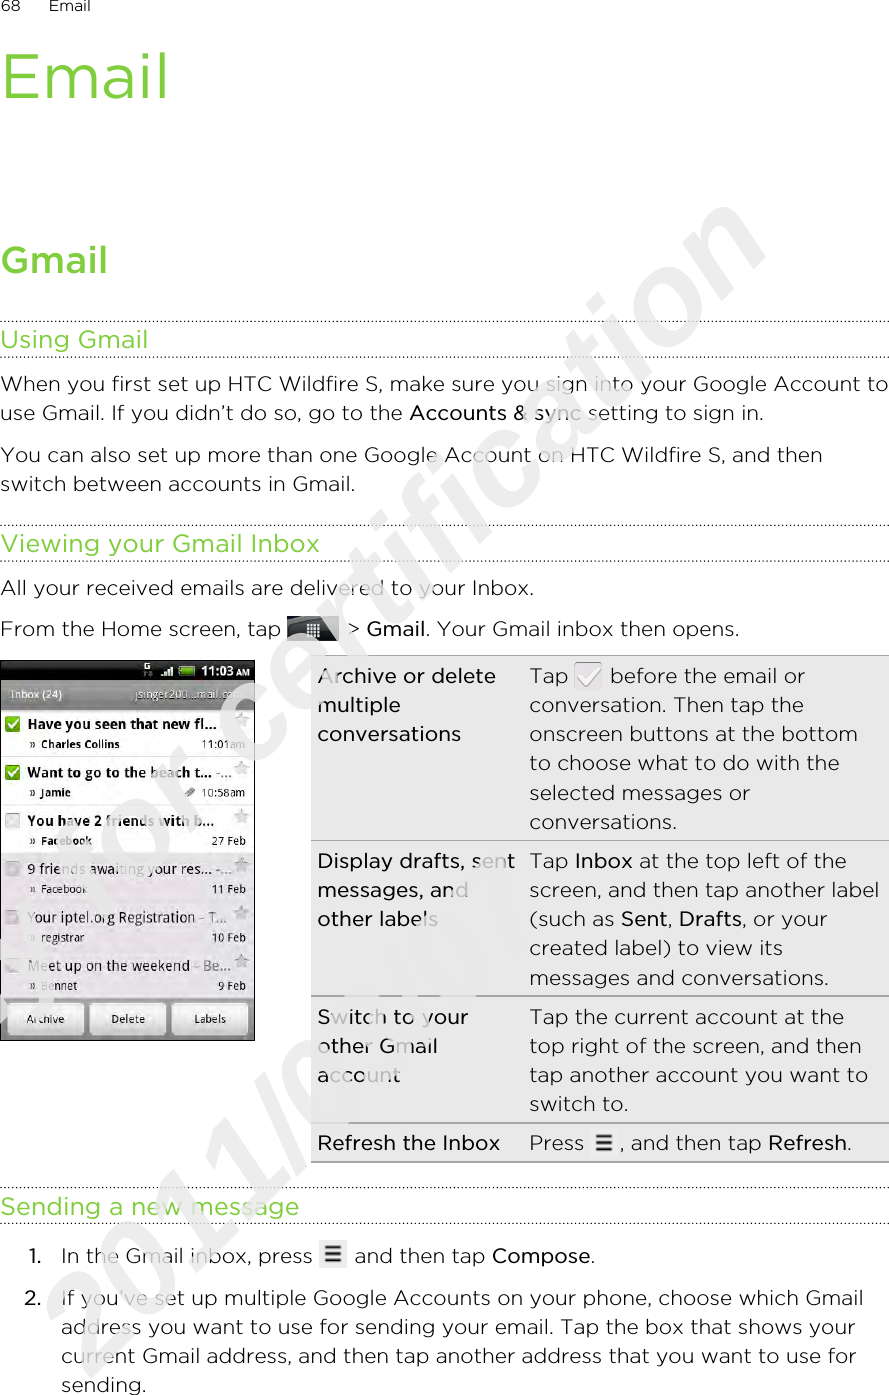 EmailGmailUsing GmailWhen you first set up HTC Wildfire S, make sure you sign into your Google Account touse Gmail. If you didn’t do so, go to the Accounts &amp; sync setting to sign in.You can also set up more than one Google Account on HTC Wildfire S, and thenswitch between accounts in Gmail.Viewing your Gmail InboxAll your received emails are delivered to your Inbox.From the Home screen, tap   &gt; Gmail. Your Gmail inbox then opens.Archive or deletemultipleconversationsTap   before the email orconversation. Then tap theonscreen buttons at the bottomto choose what to do with theselected messages orconversations.Display drafts, sentmessages, andother labelsTap Inbox at the top left of thescreen, and then tap another label(such as Sent, Drafts, or yourcreated label) to view itsmessages and conversations.Switch to yourother GmailaccountTap the current account at thetop right of the screen, and thentap another account you want toswitch to.Refresh the Inbox Press  , and then tap Refresh.Sending a new message1. In the Gmail inbox, press   and then tap Compose.2. If you’ve set up multiple Google Accounts on your phone, choose which Gmailaddress you want to use for sending your email. Tap the box that shows yourcurrent Gmail address, and then tap another address that you want to use forsending.68 EmailOnly for certification  2011/03/07